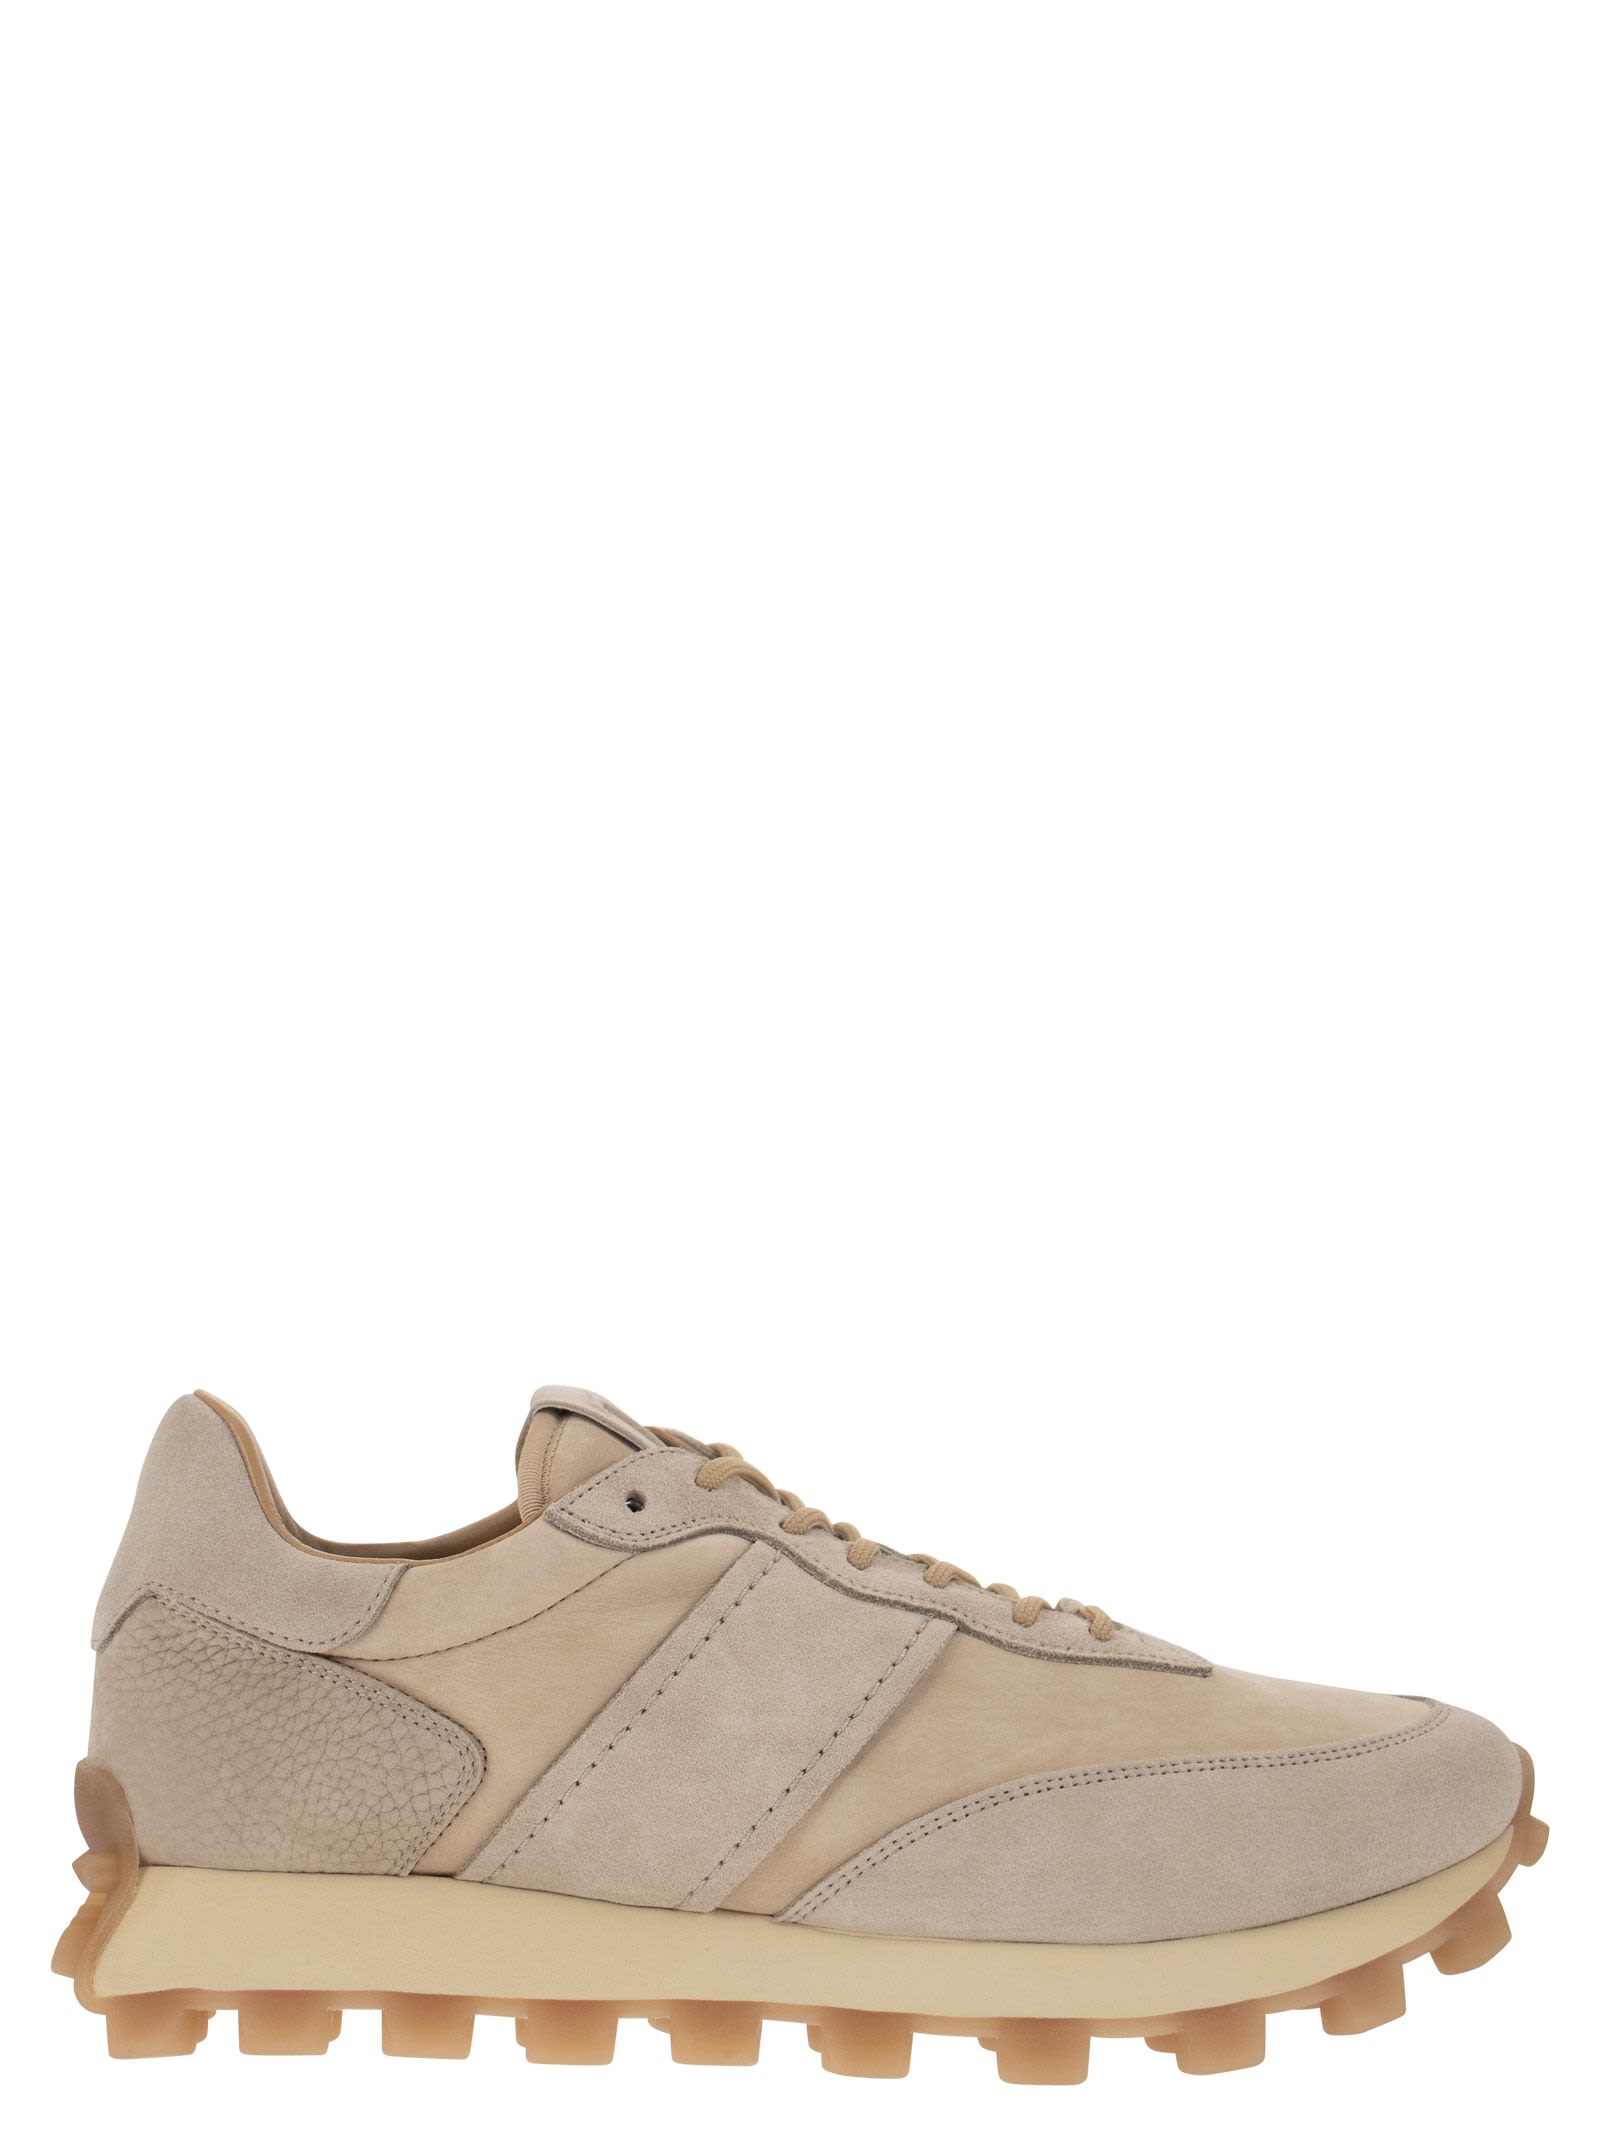 TOD'S 1T NUBUCK LEATHER SNEAKERS